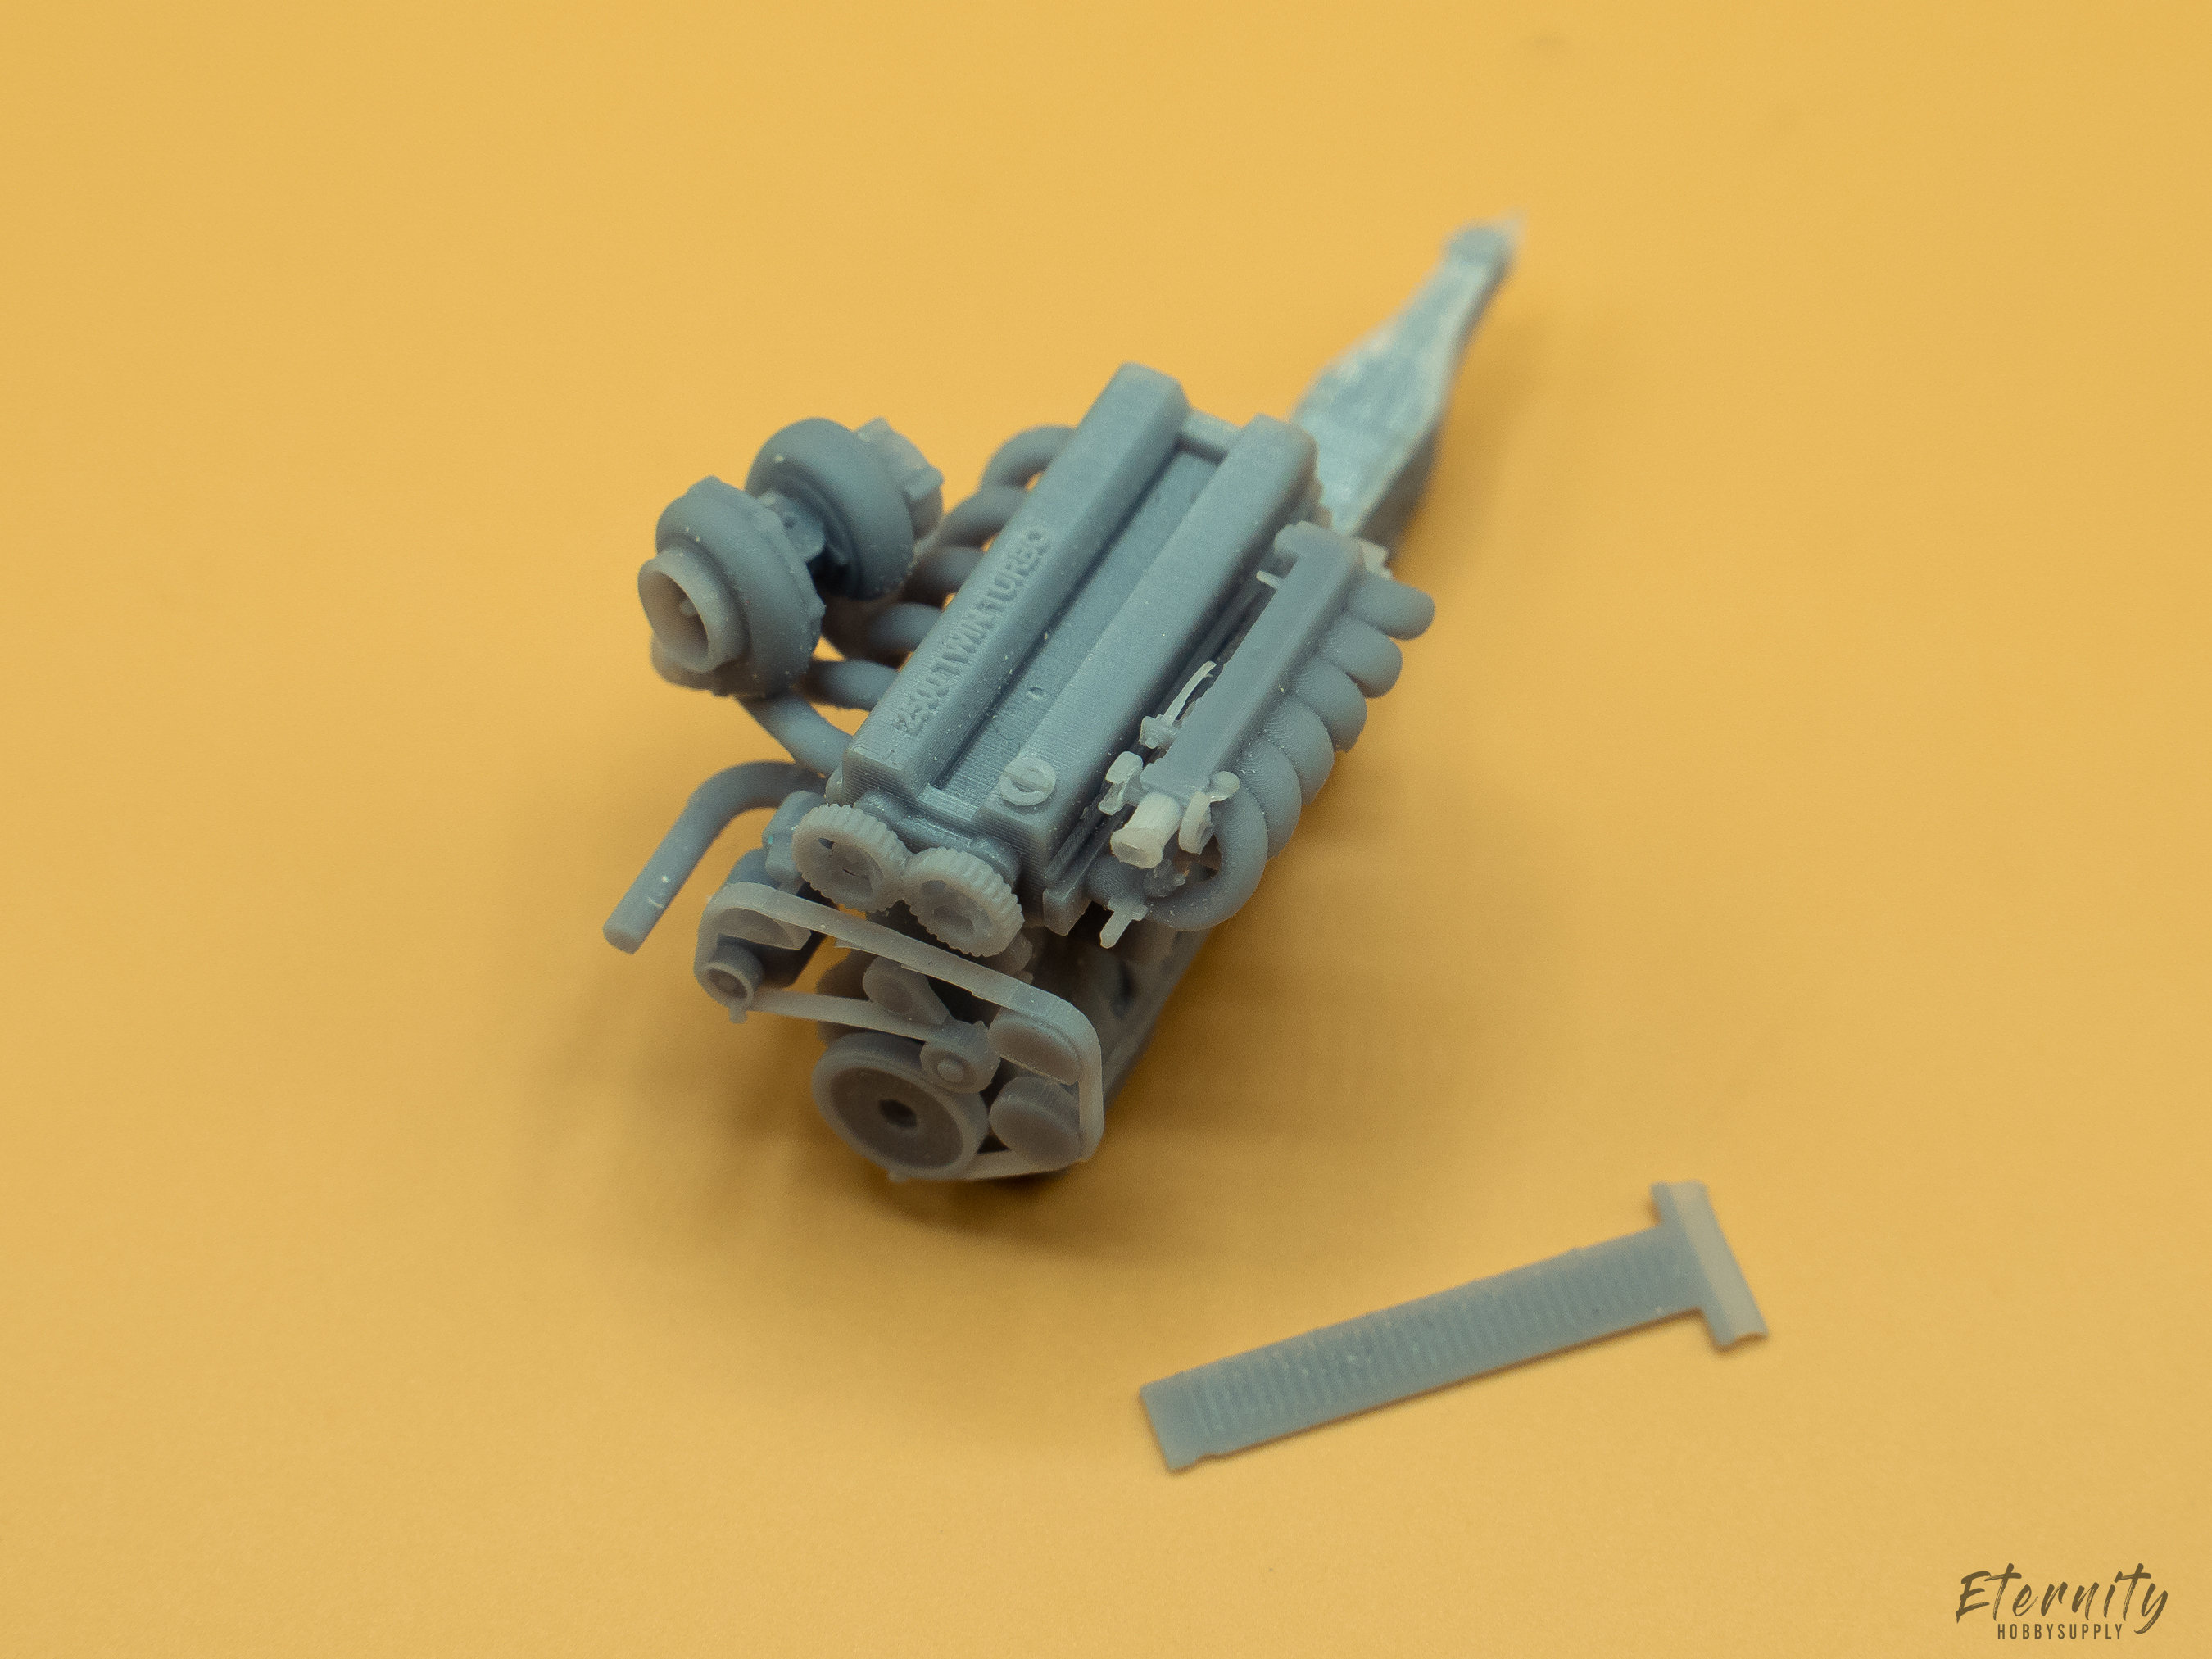 LS3 LS1 model engine resin 3D printed 1:24-1:8 scale